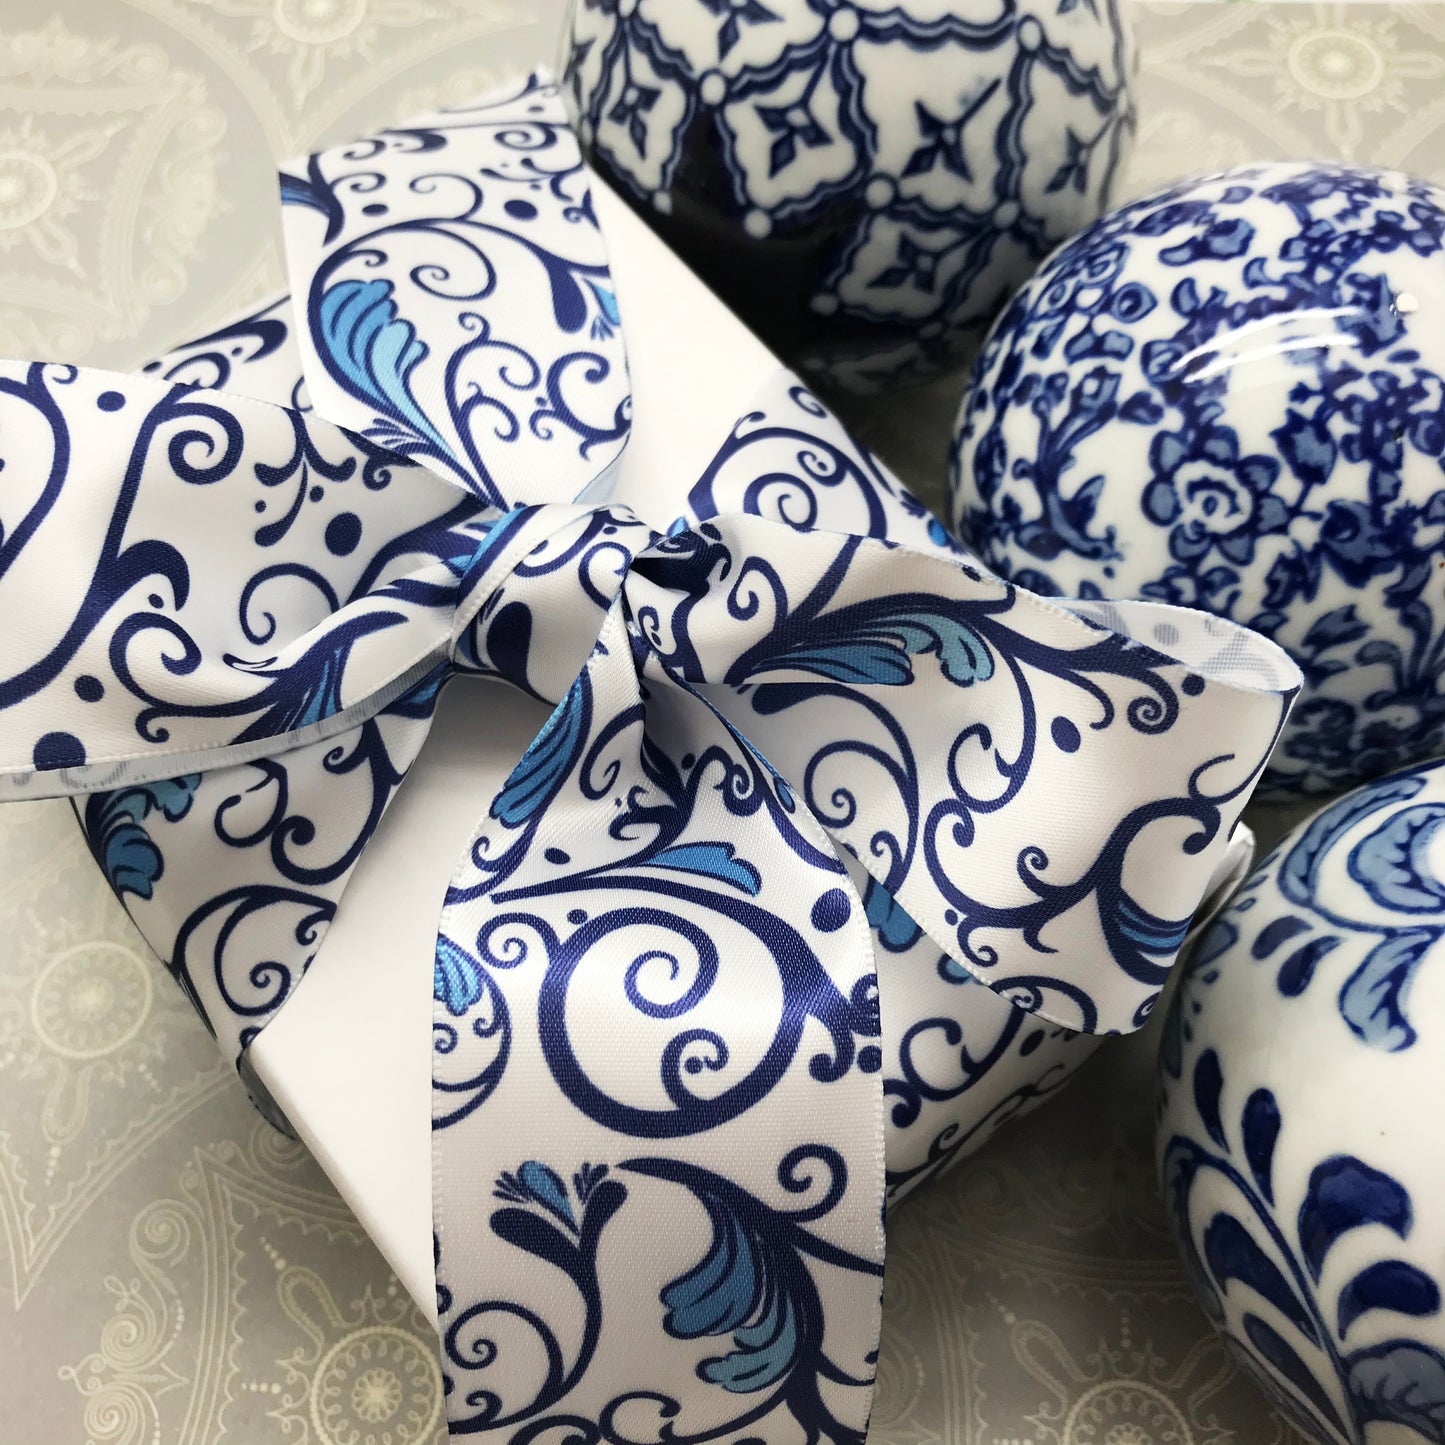 Chinoiserie Ginger jar filigree design ribbon in blue and white printed on 1.5" white single face satin